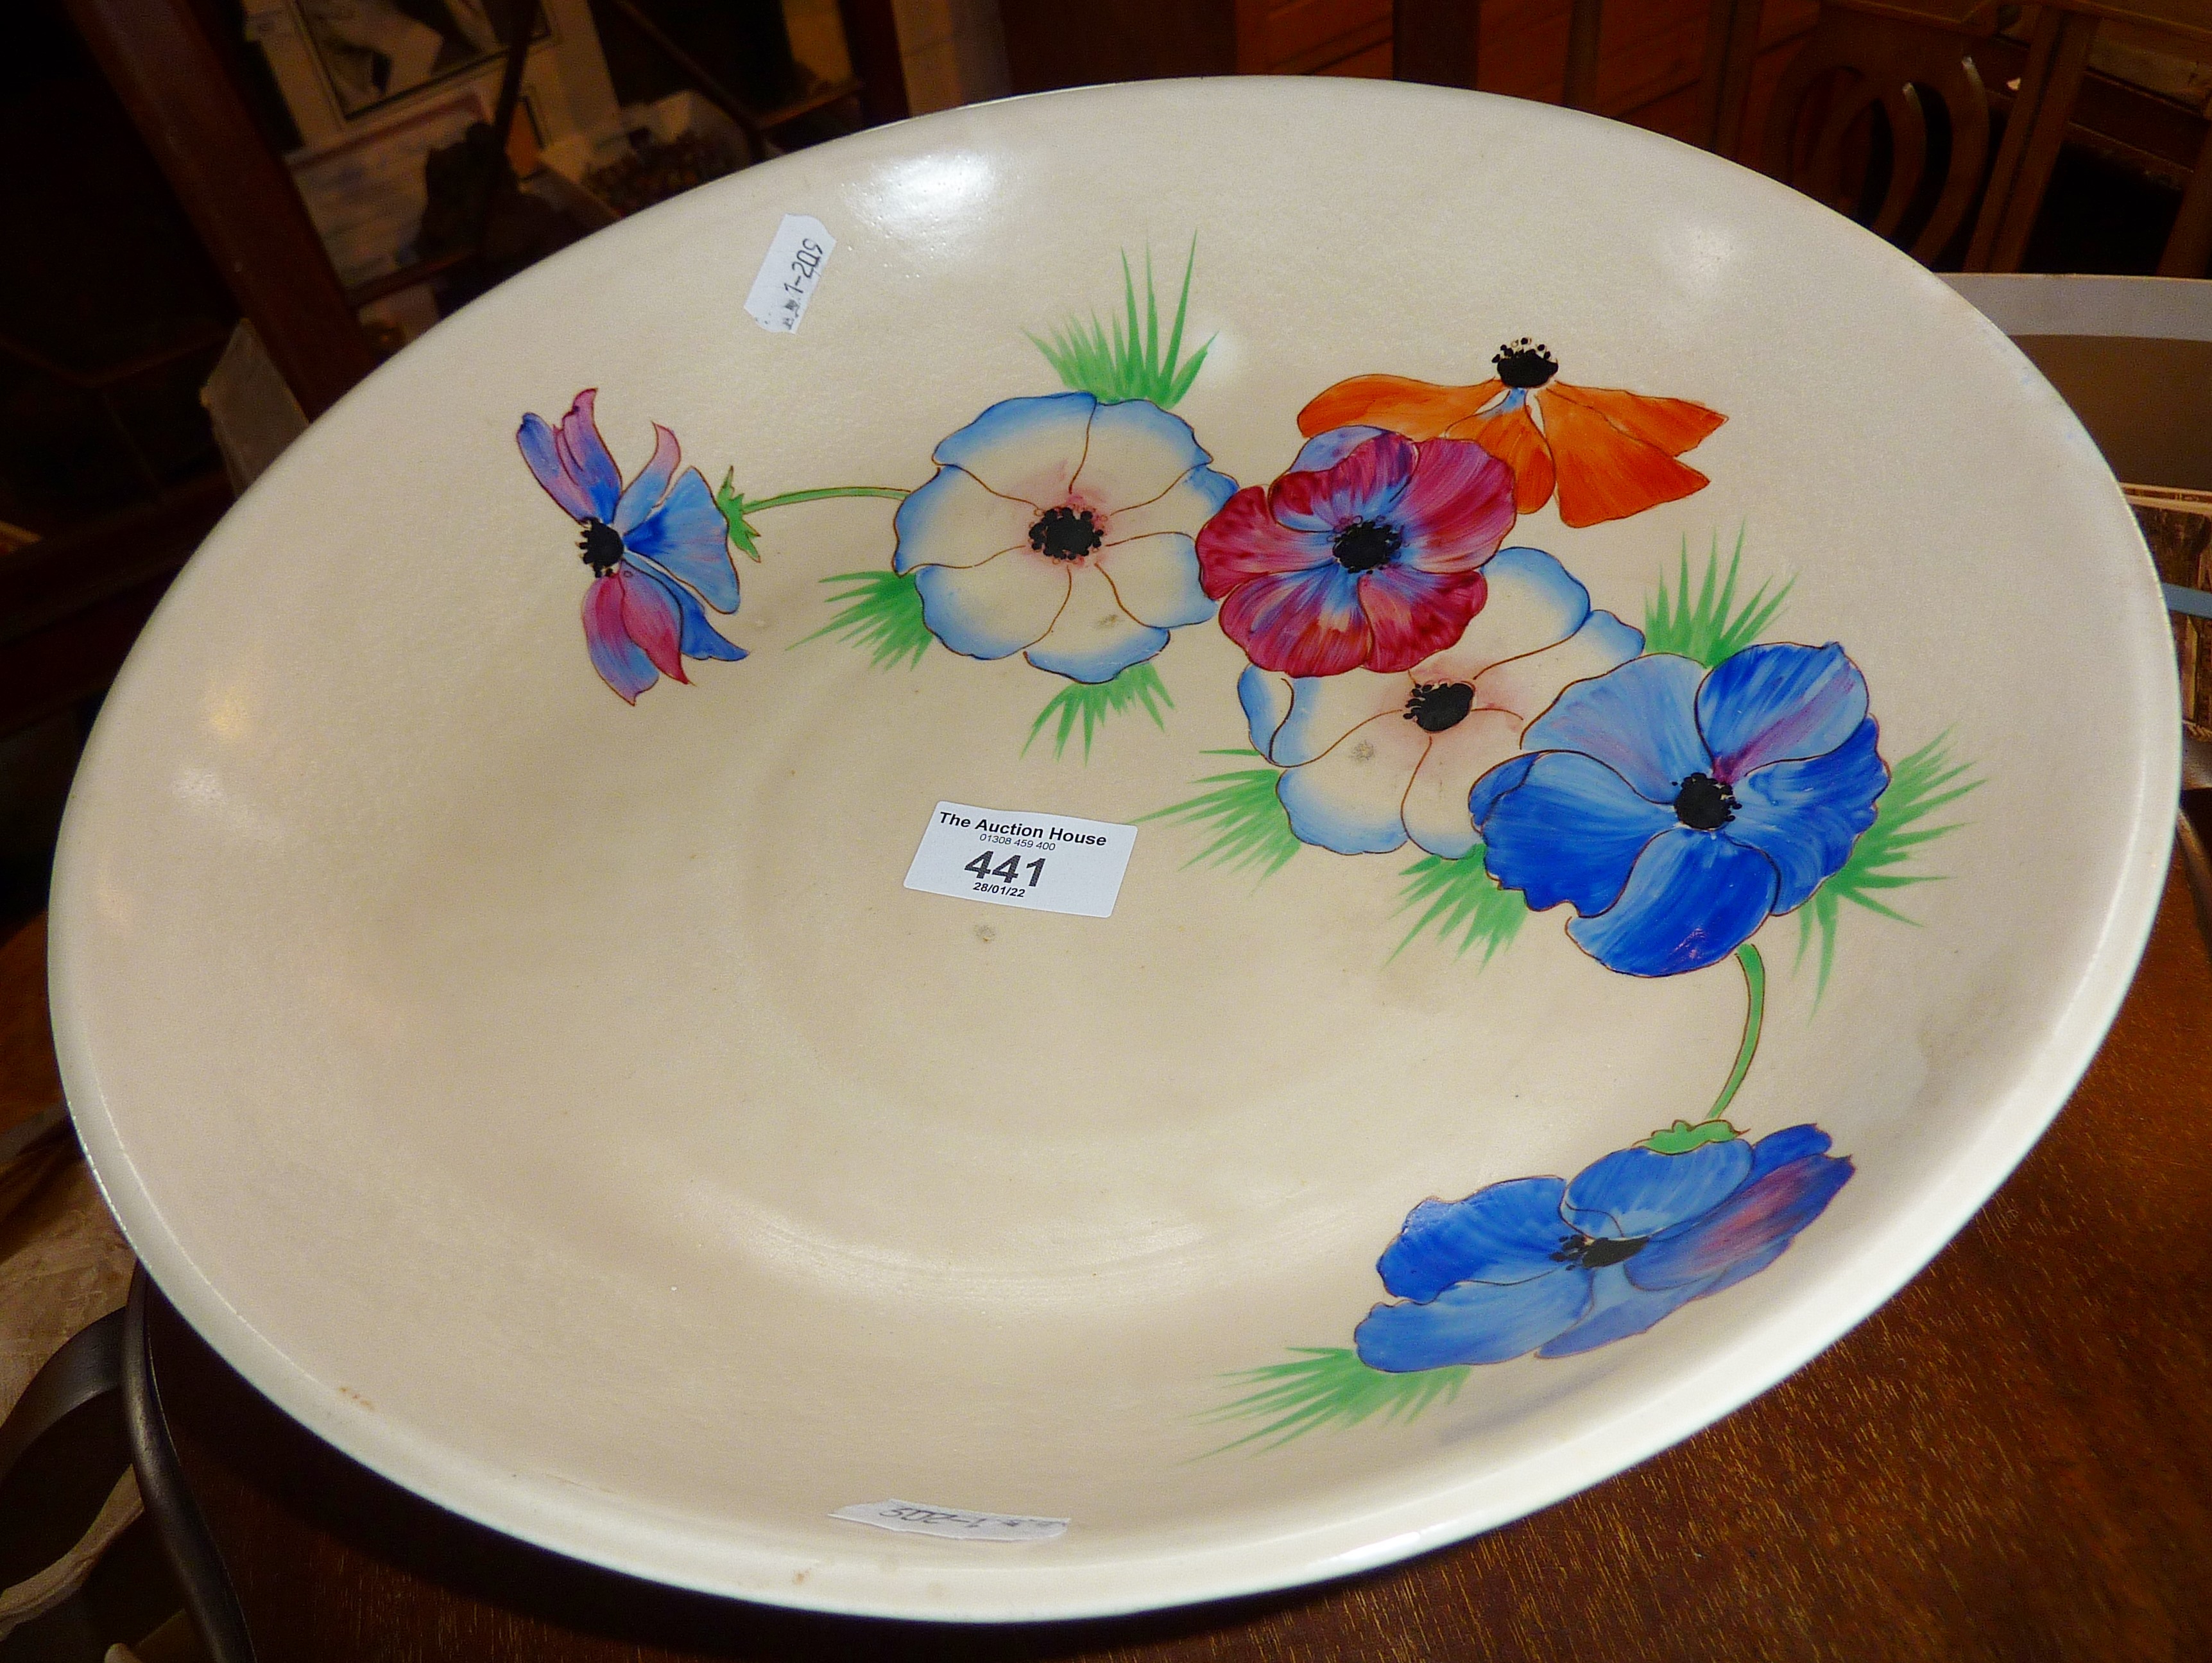 Clarice Cliff Art Deco Wilkinson Ltd. bowl decorated with flowers, approx. 30cm diameter